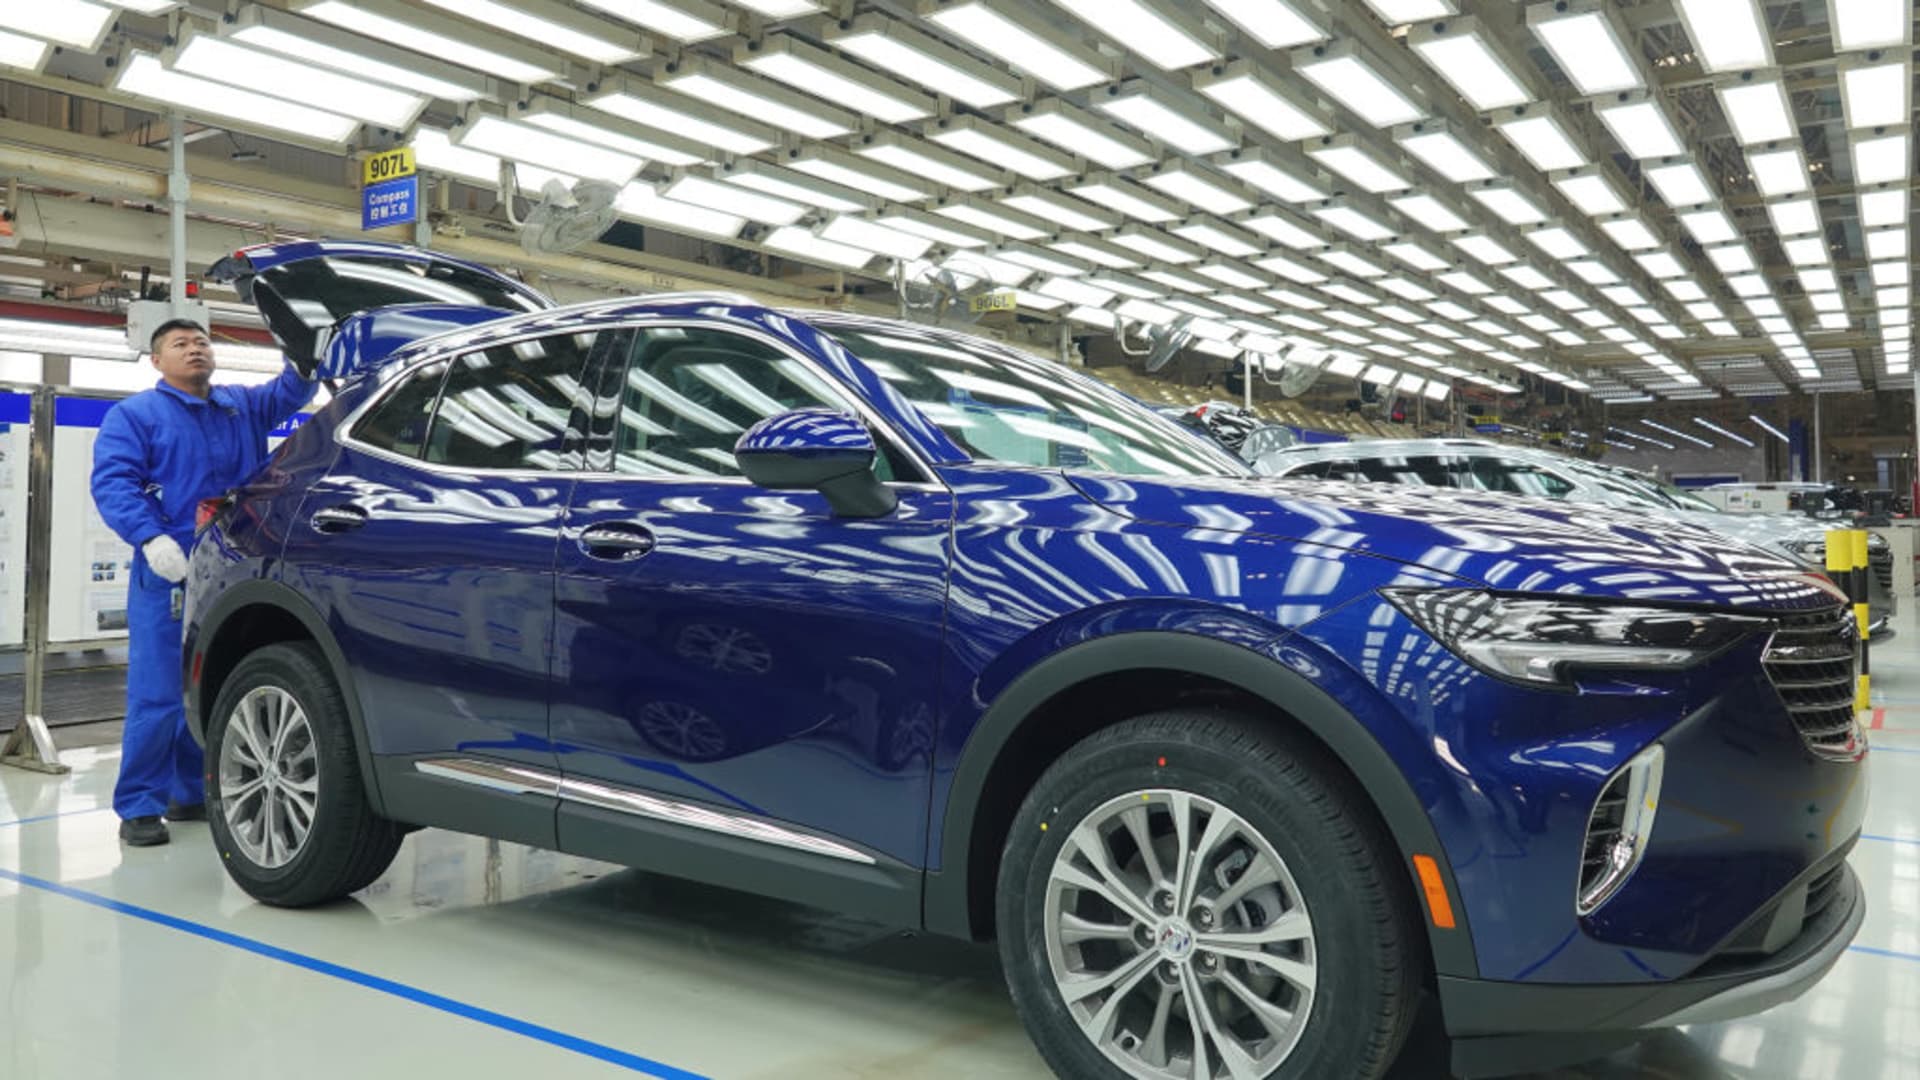 Employees work on Buick Envision SUVs at General Motors' Dong Yue assembly plant, officially known as SAIC-GM Dong Yue Motors Co., Ltd., on Nov. 17, 2022, in Yantai, Shandong Province of China.